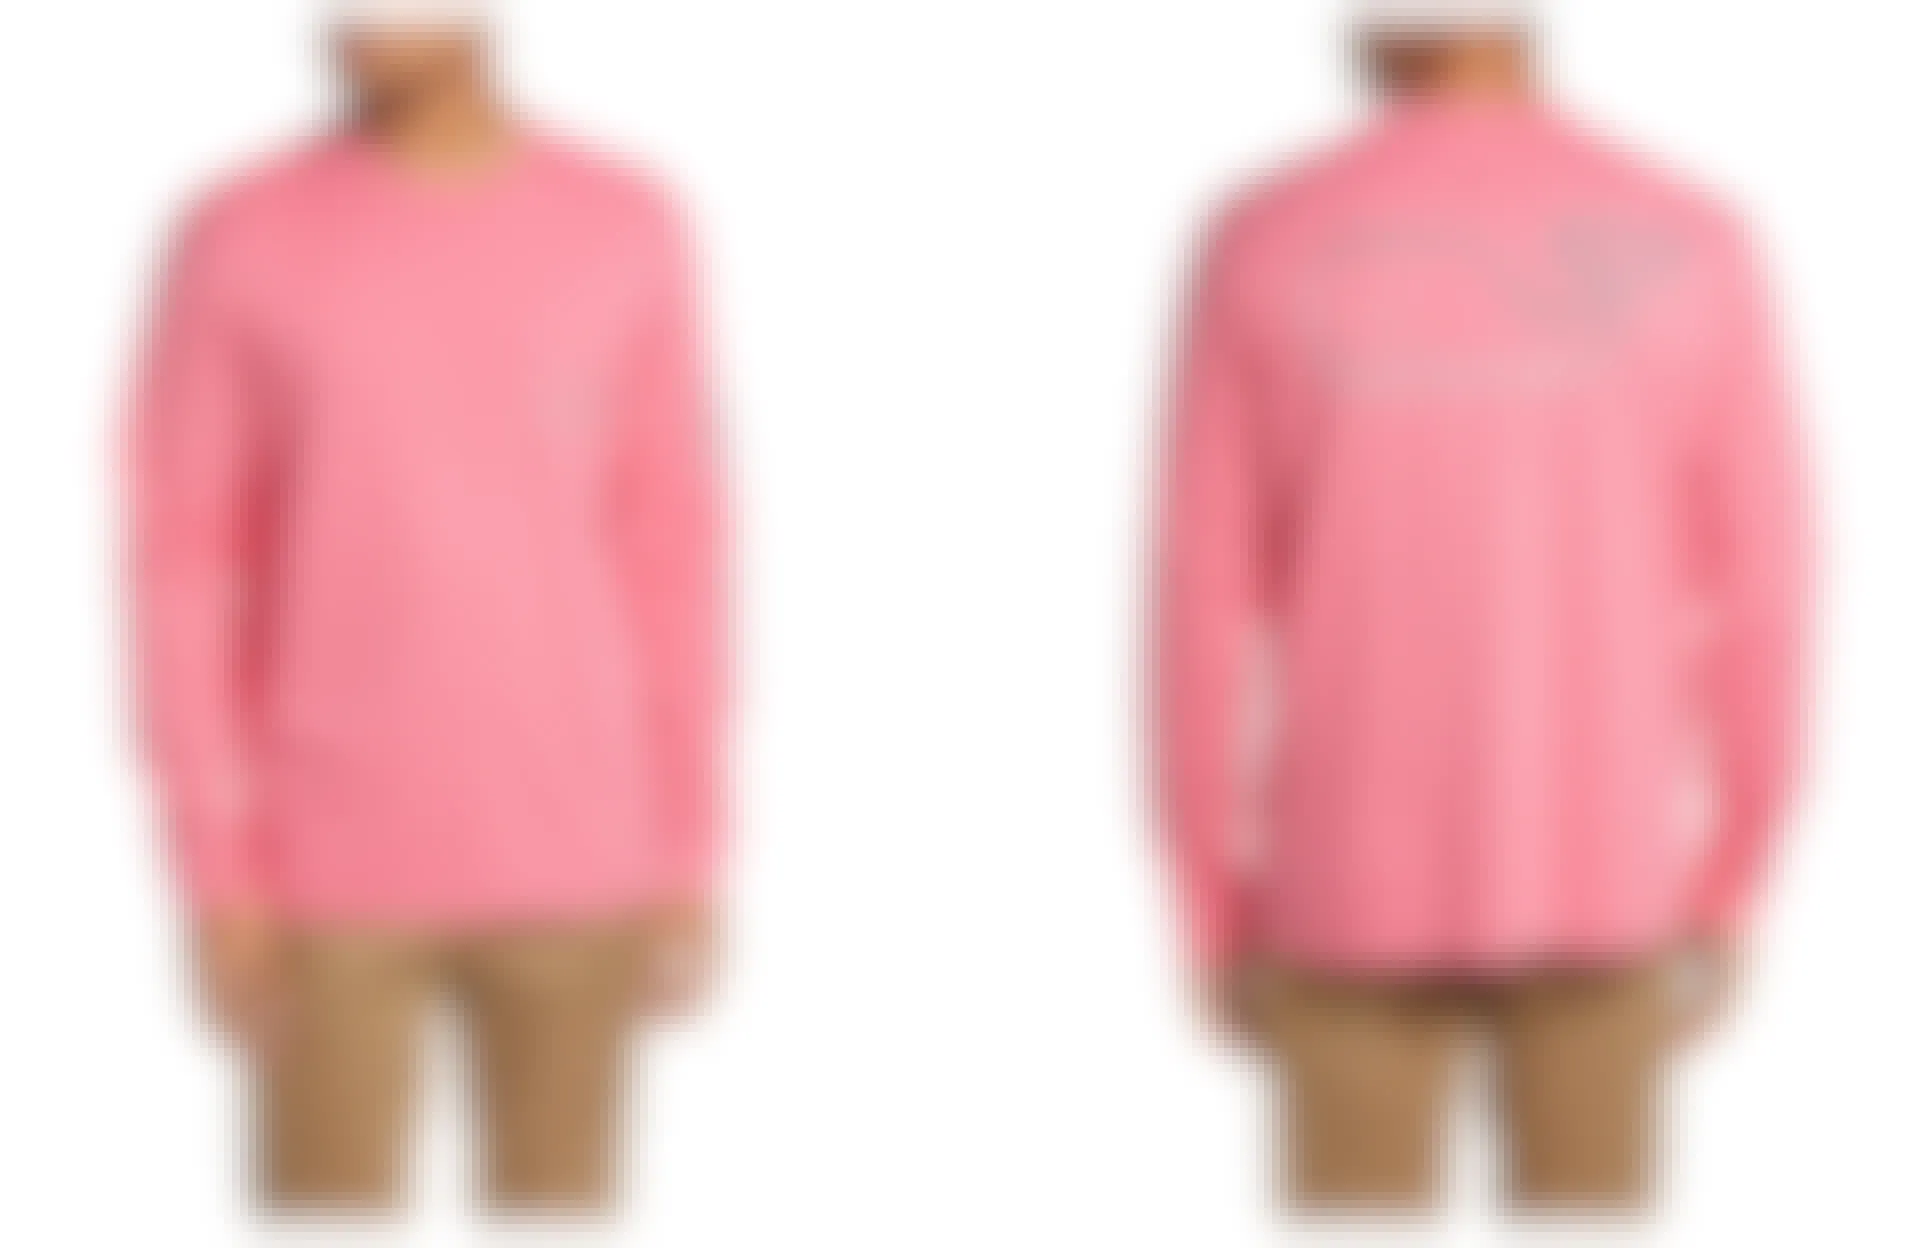 A Nordstrom model wearing a pink Vineyard Vines long sleeve t shirt from Nordstrom.